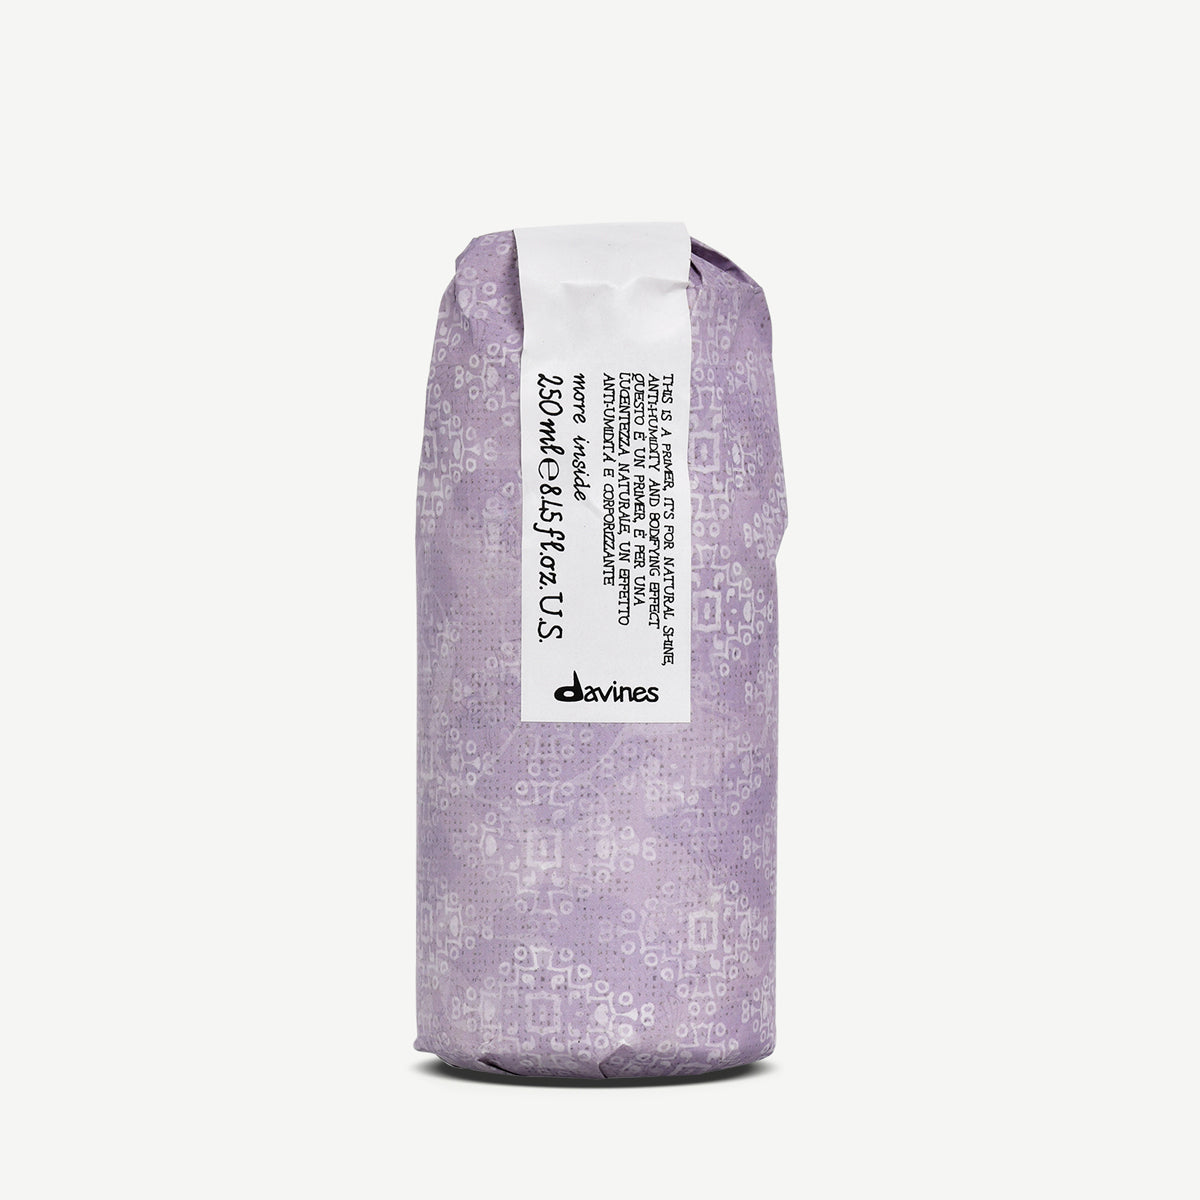 This is a Blow Dry Primer 1  Davines
